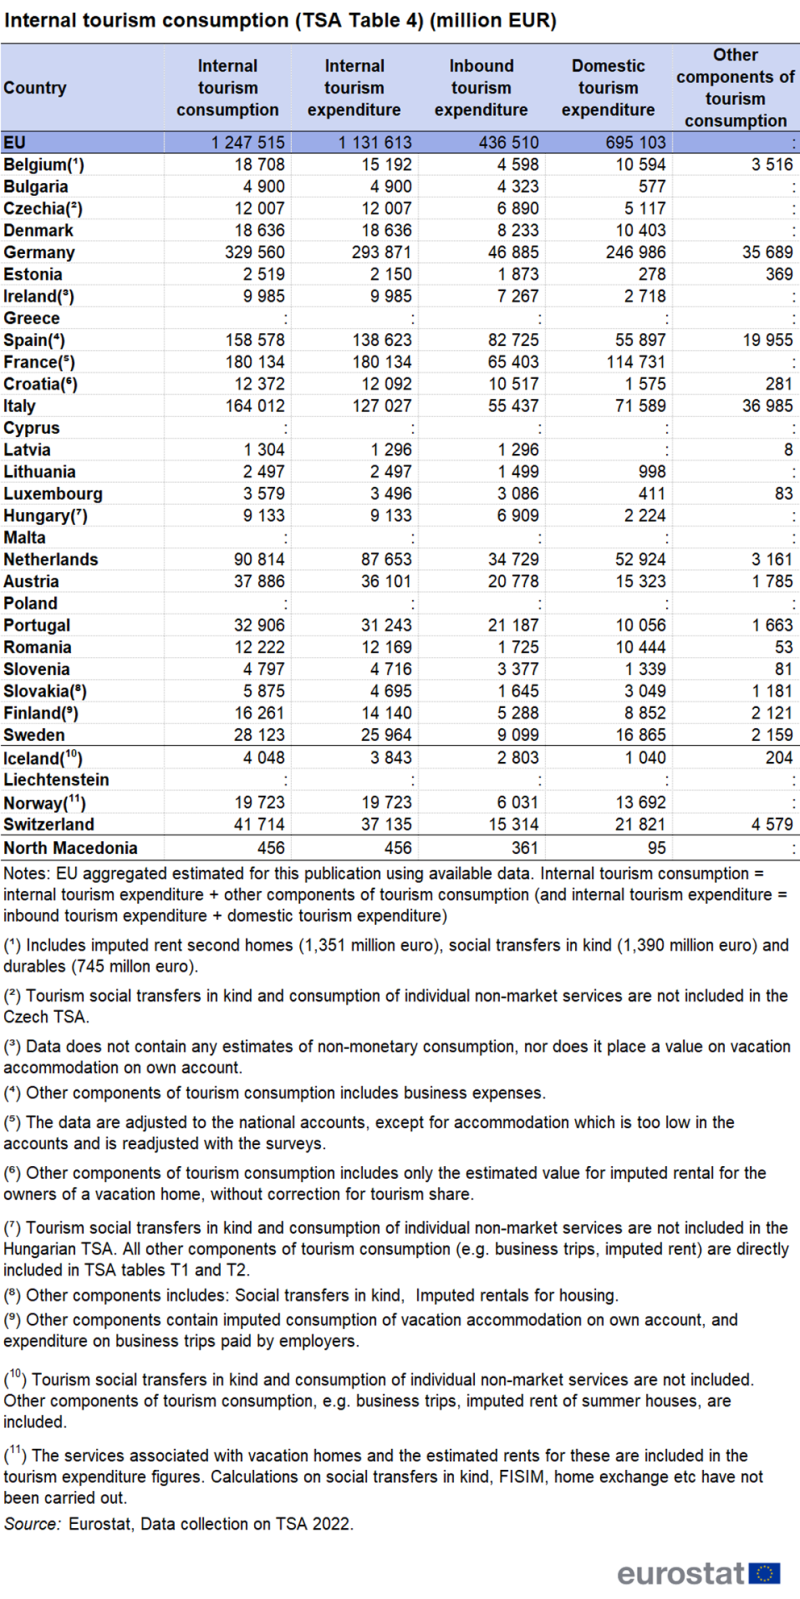 Table showing internal tourism consumption and its main components, in the EU, individual EU Member States, EFTA countries and candidate countries for which data is available.